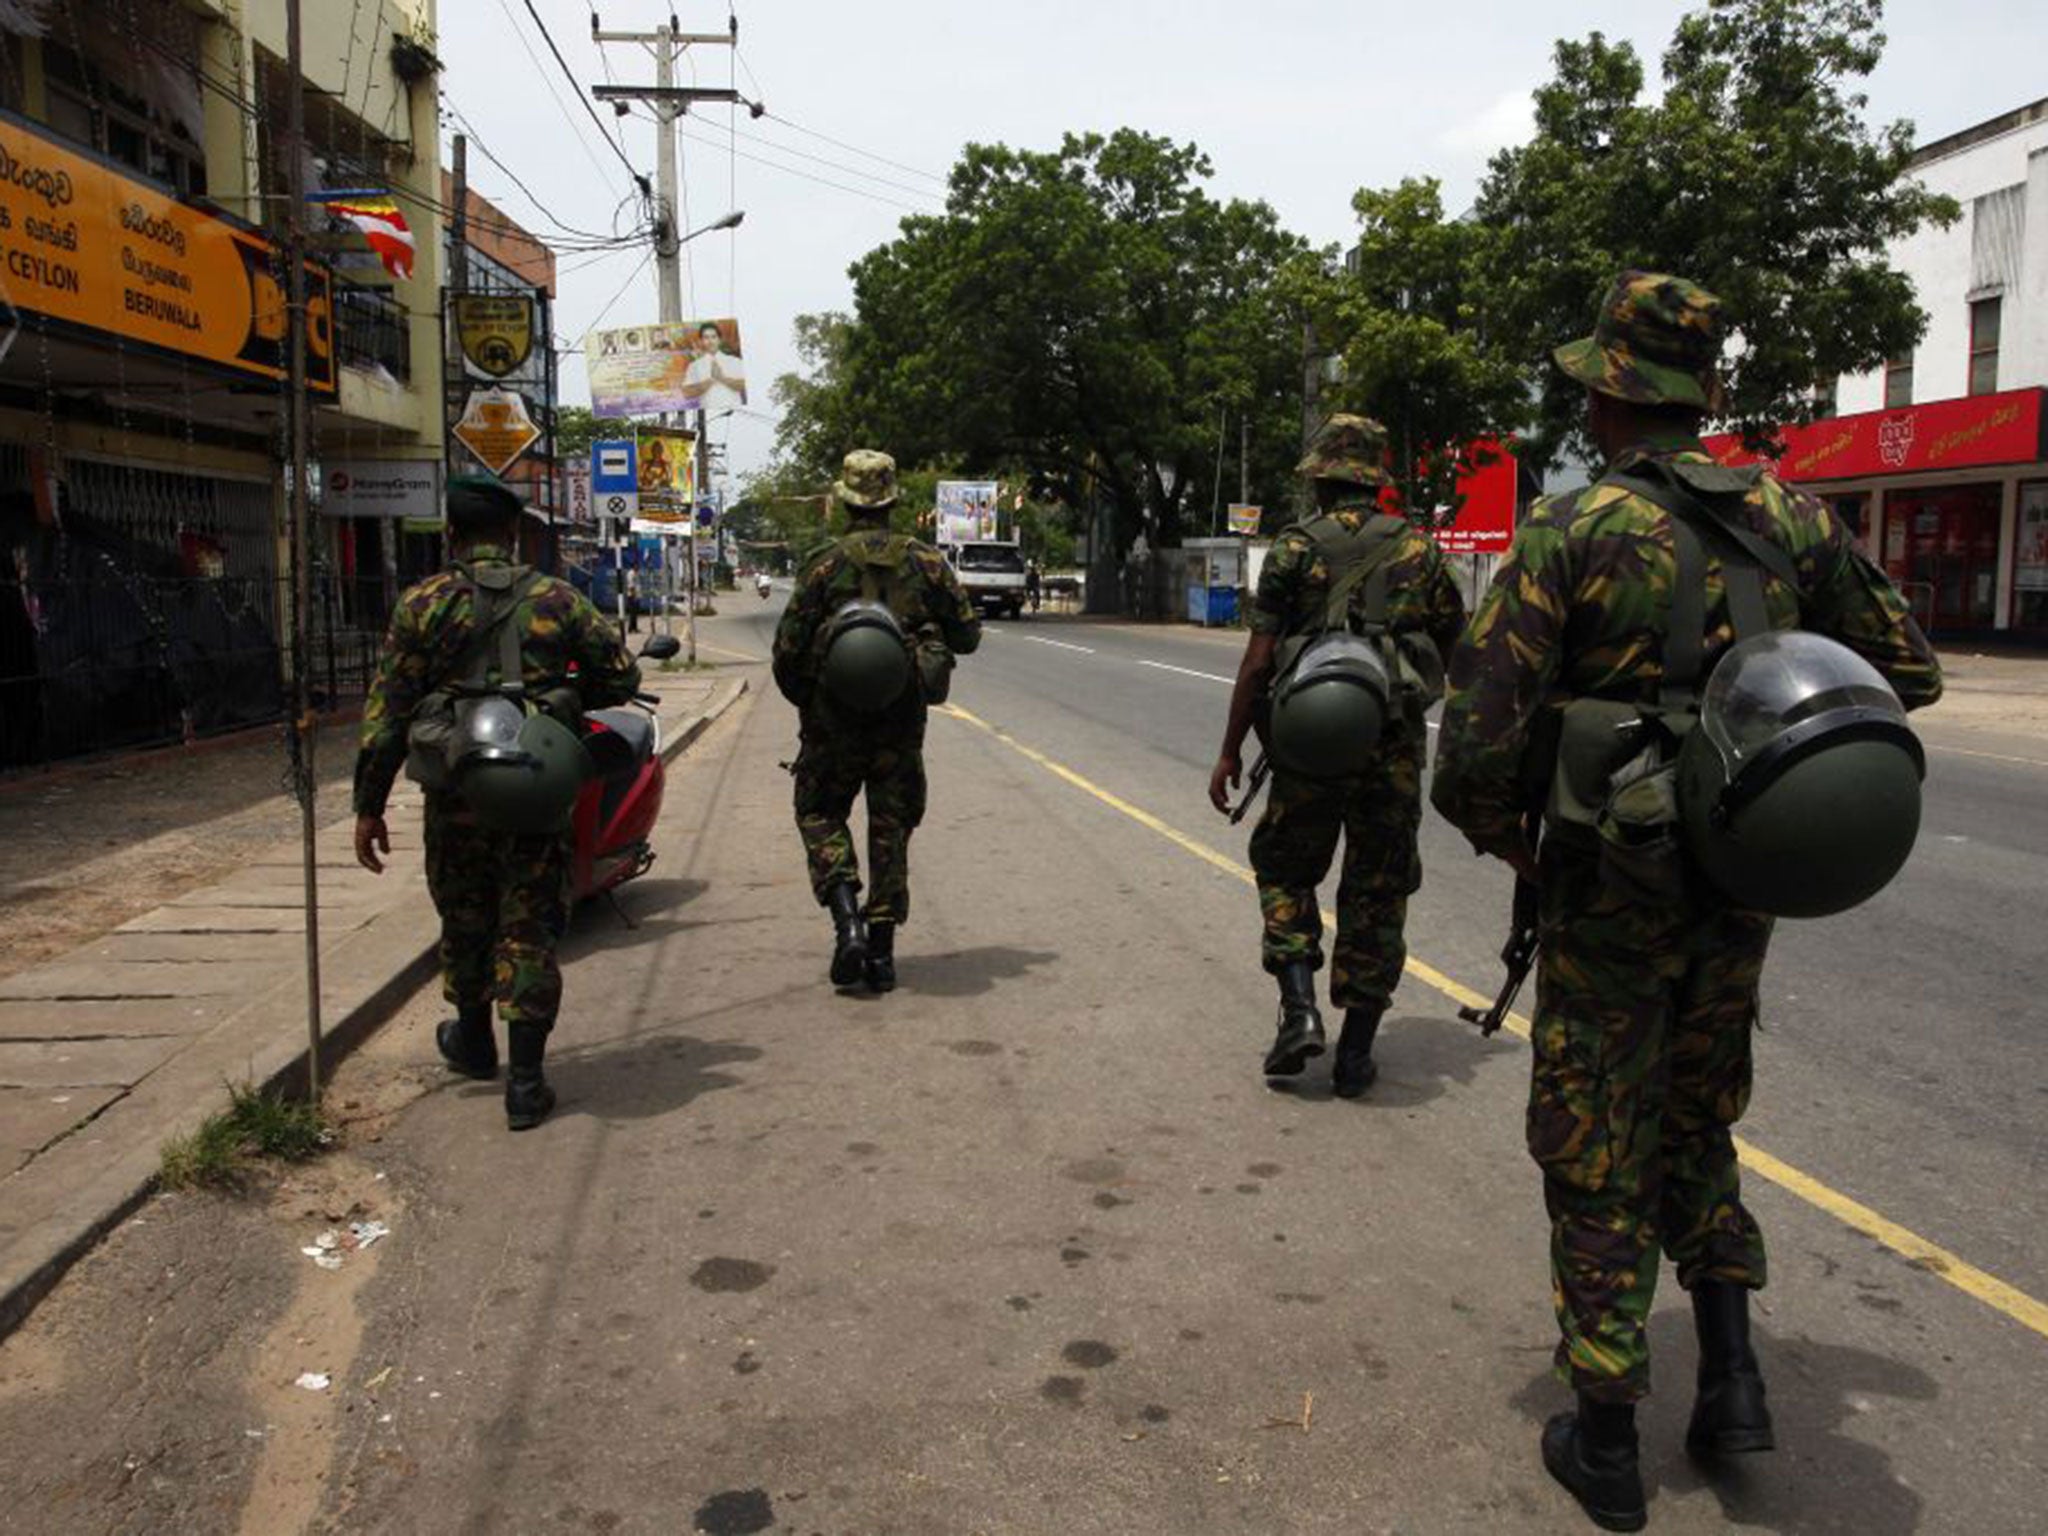 Sri Lanka Police Special Task Force personnel patrol deserted roads following sectarian violence in Aluthgama, 60 kilometers south of Colombo